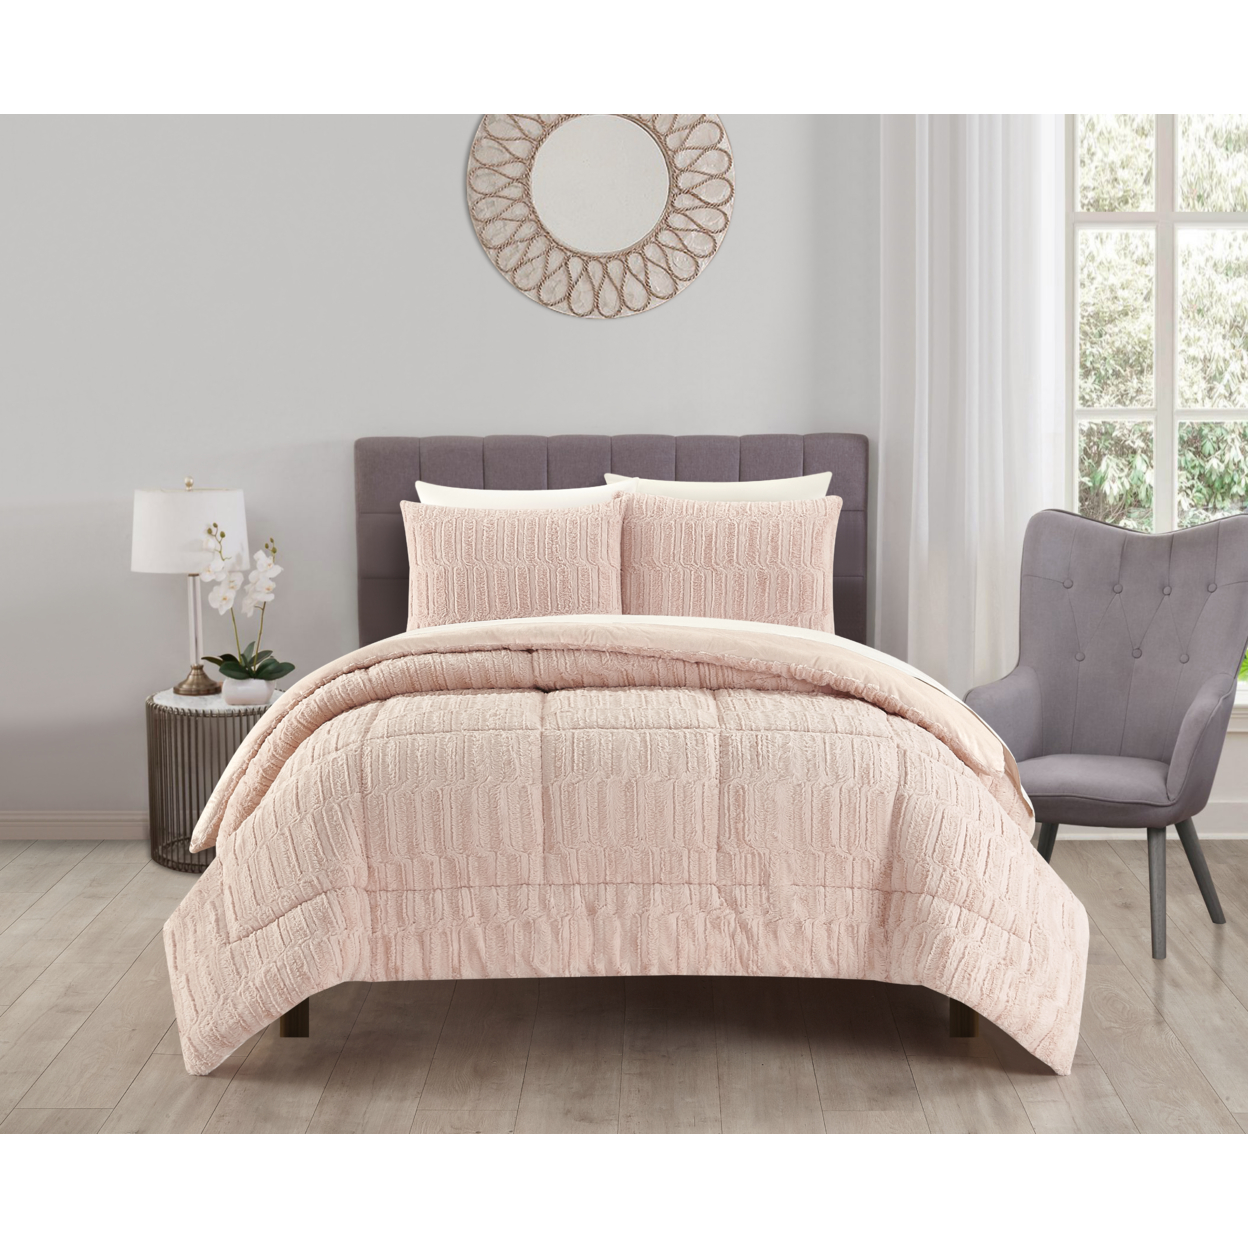 Farca 3 Or 2 Piece Comforter Textured Geometric Pattern Faux Micro-Mink Backing - Blush, Queen - 3 Piece